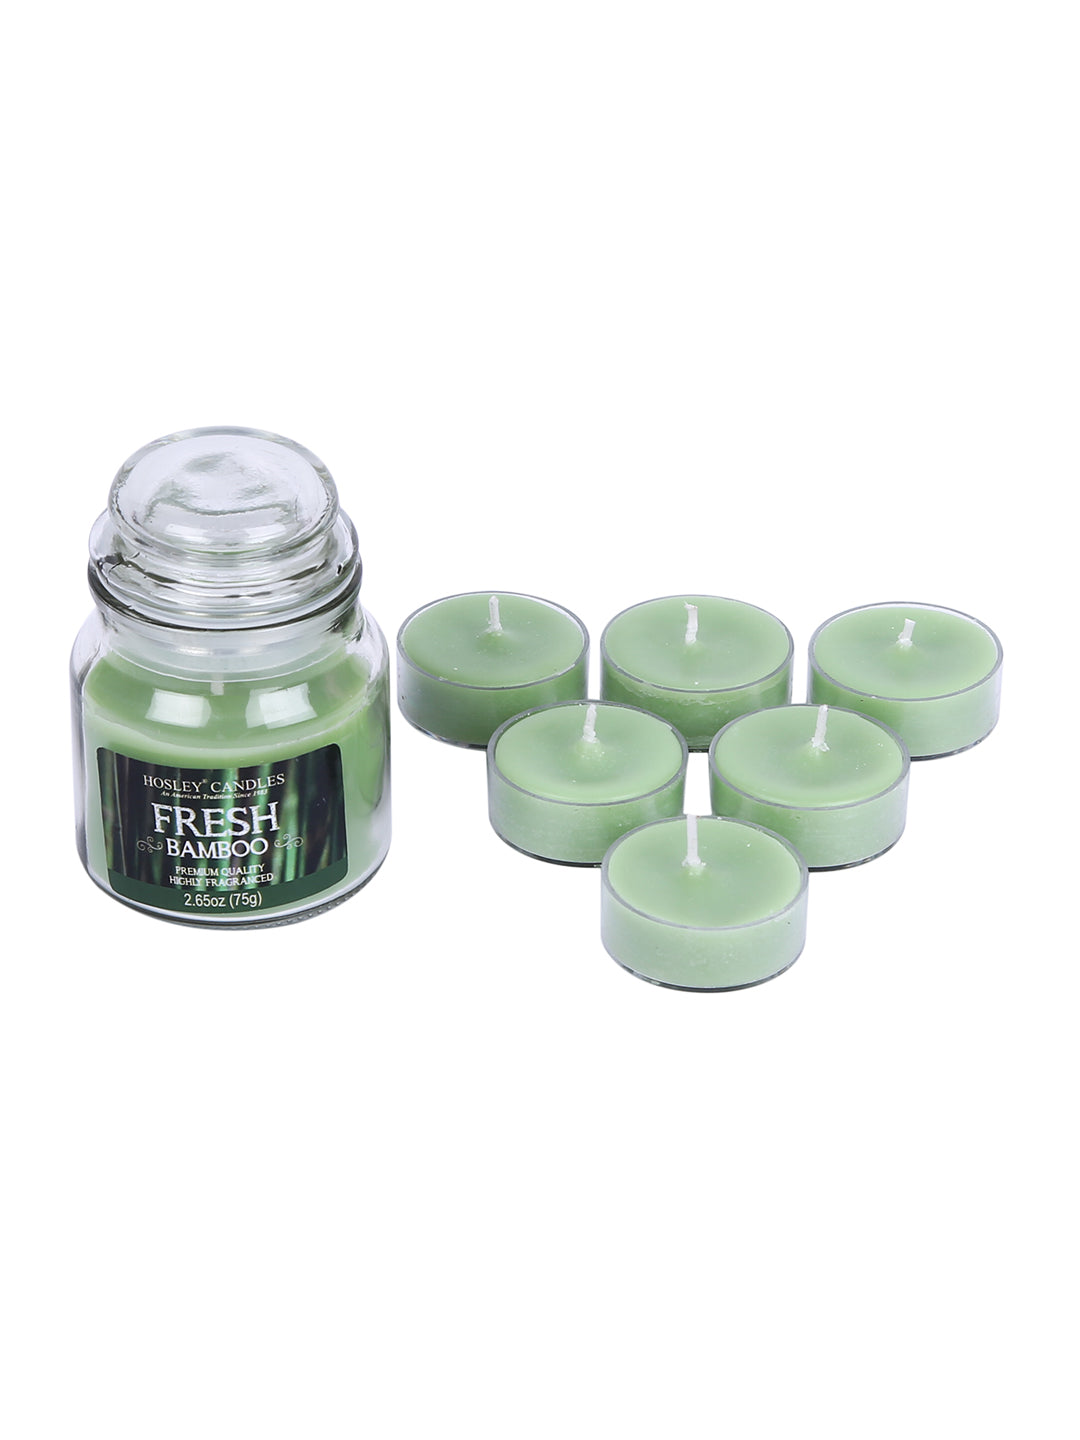 Hosley® Fresh Bamboo Highly Fragranced, 2.65 Oz wax, Jar Candle with Pack of 6-Pieces Scented Tealights